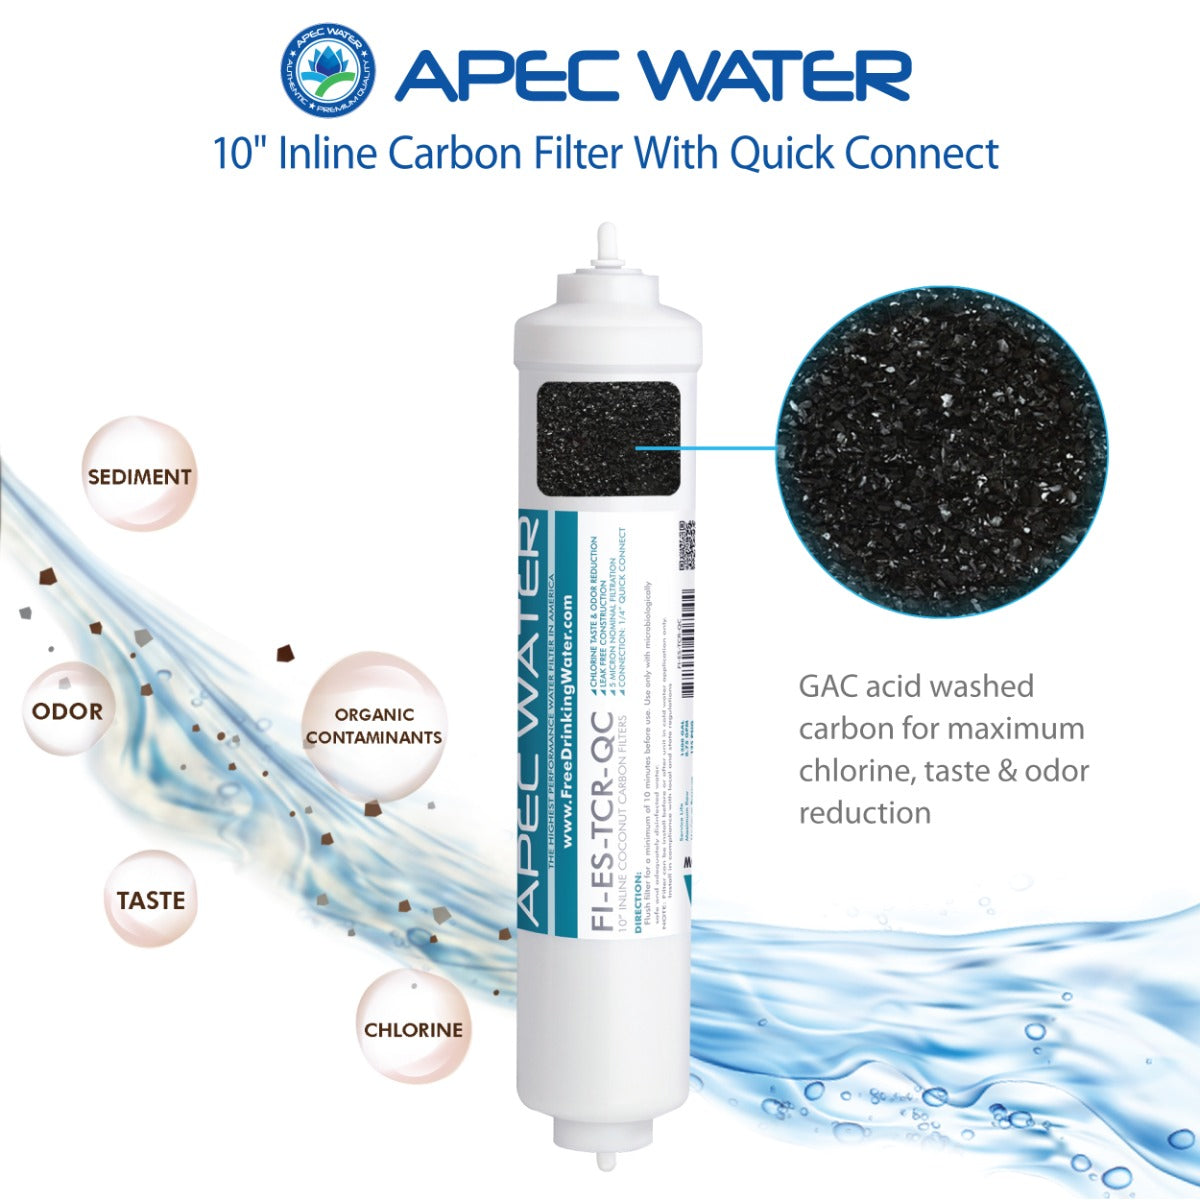 APEC RO Replacement Filters Complete Filter Set for ESSENCE ROES-50 System (Stages 1-5)